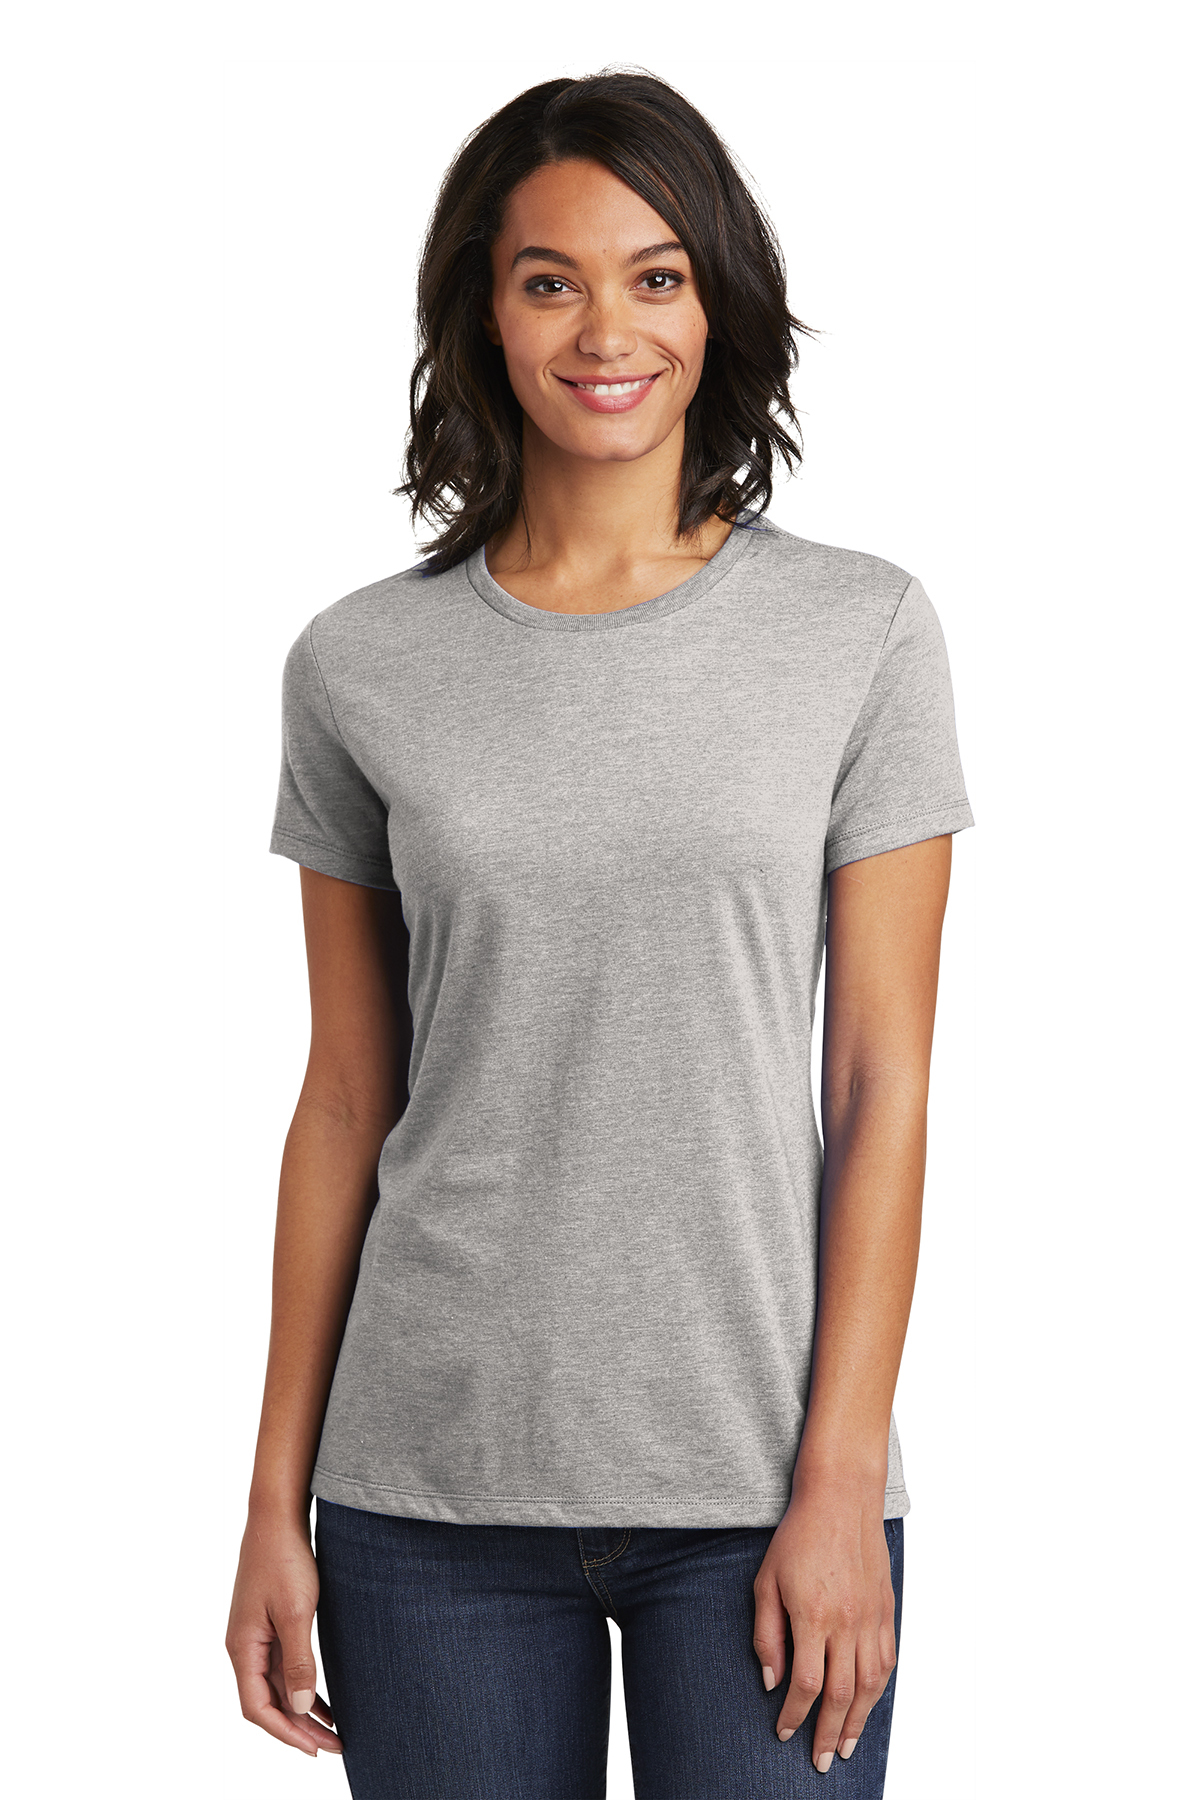 The District Tee Gray Women's